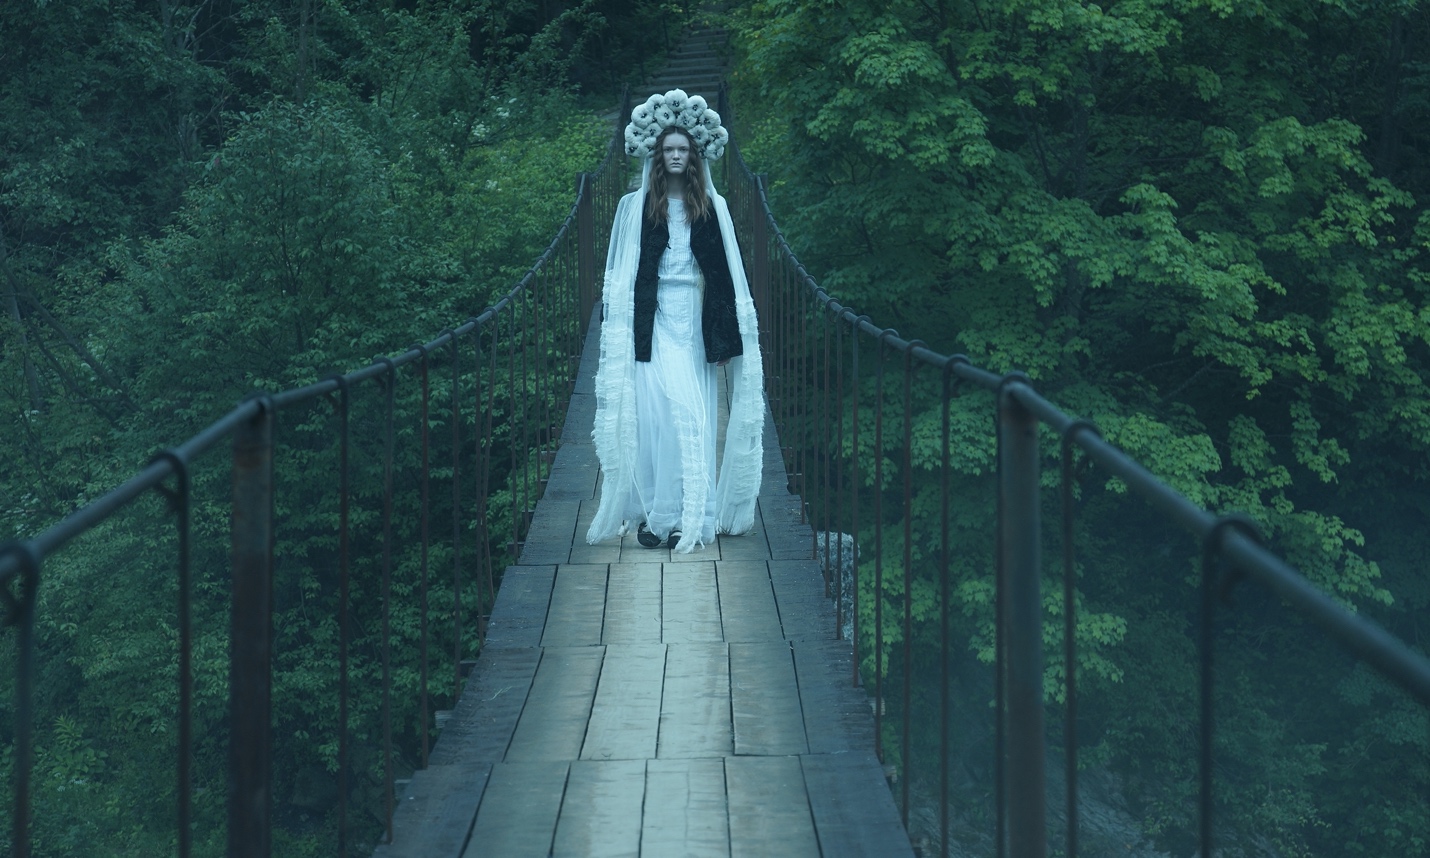 A person in a white dress and headdress on a bridge

Description automatically generated with low confidence